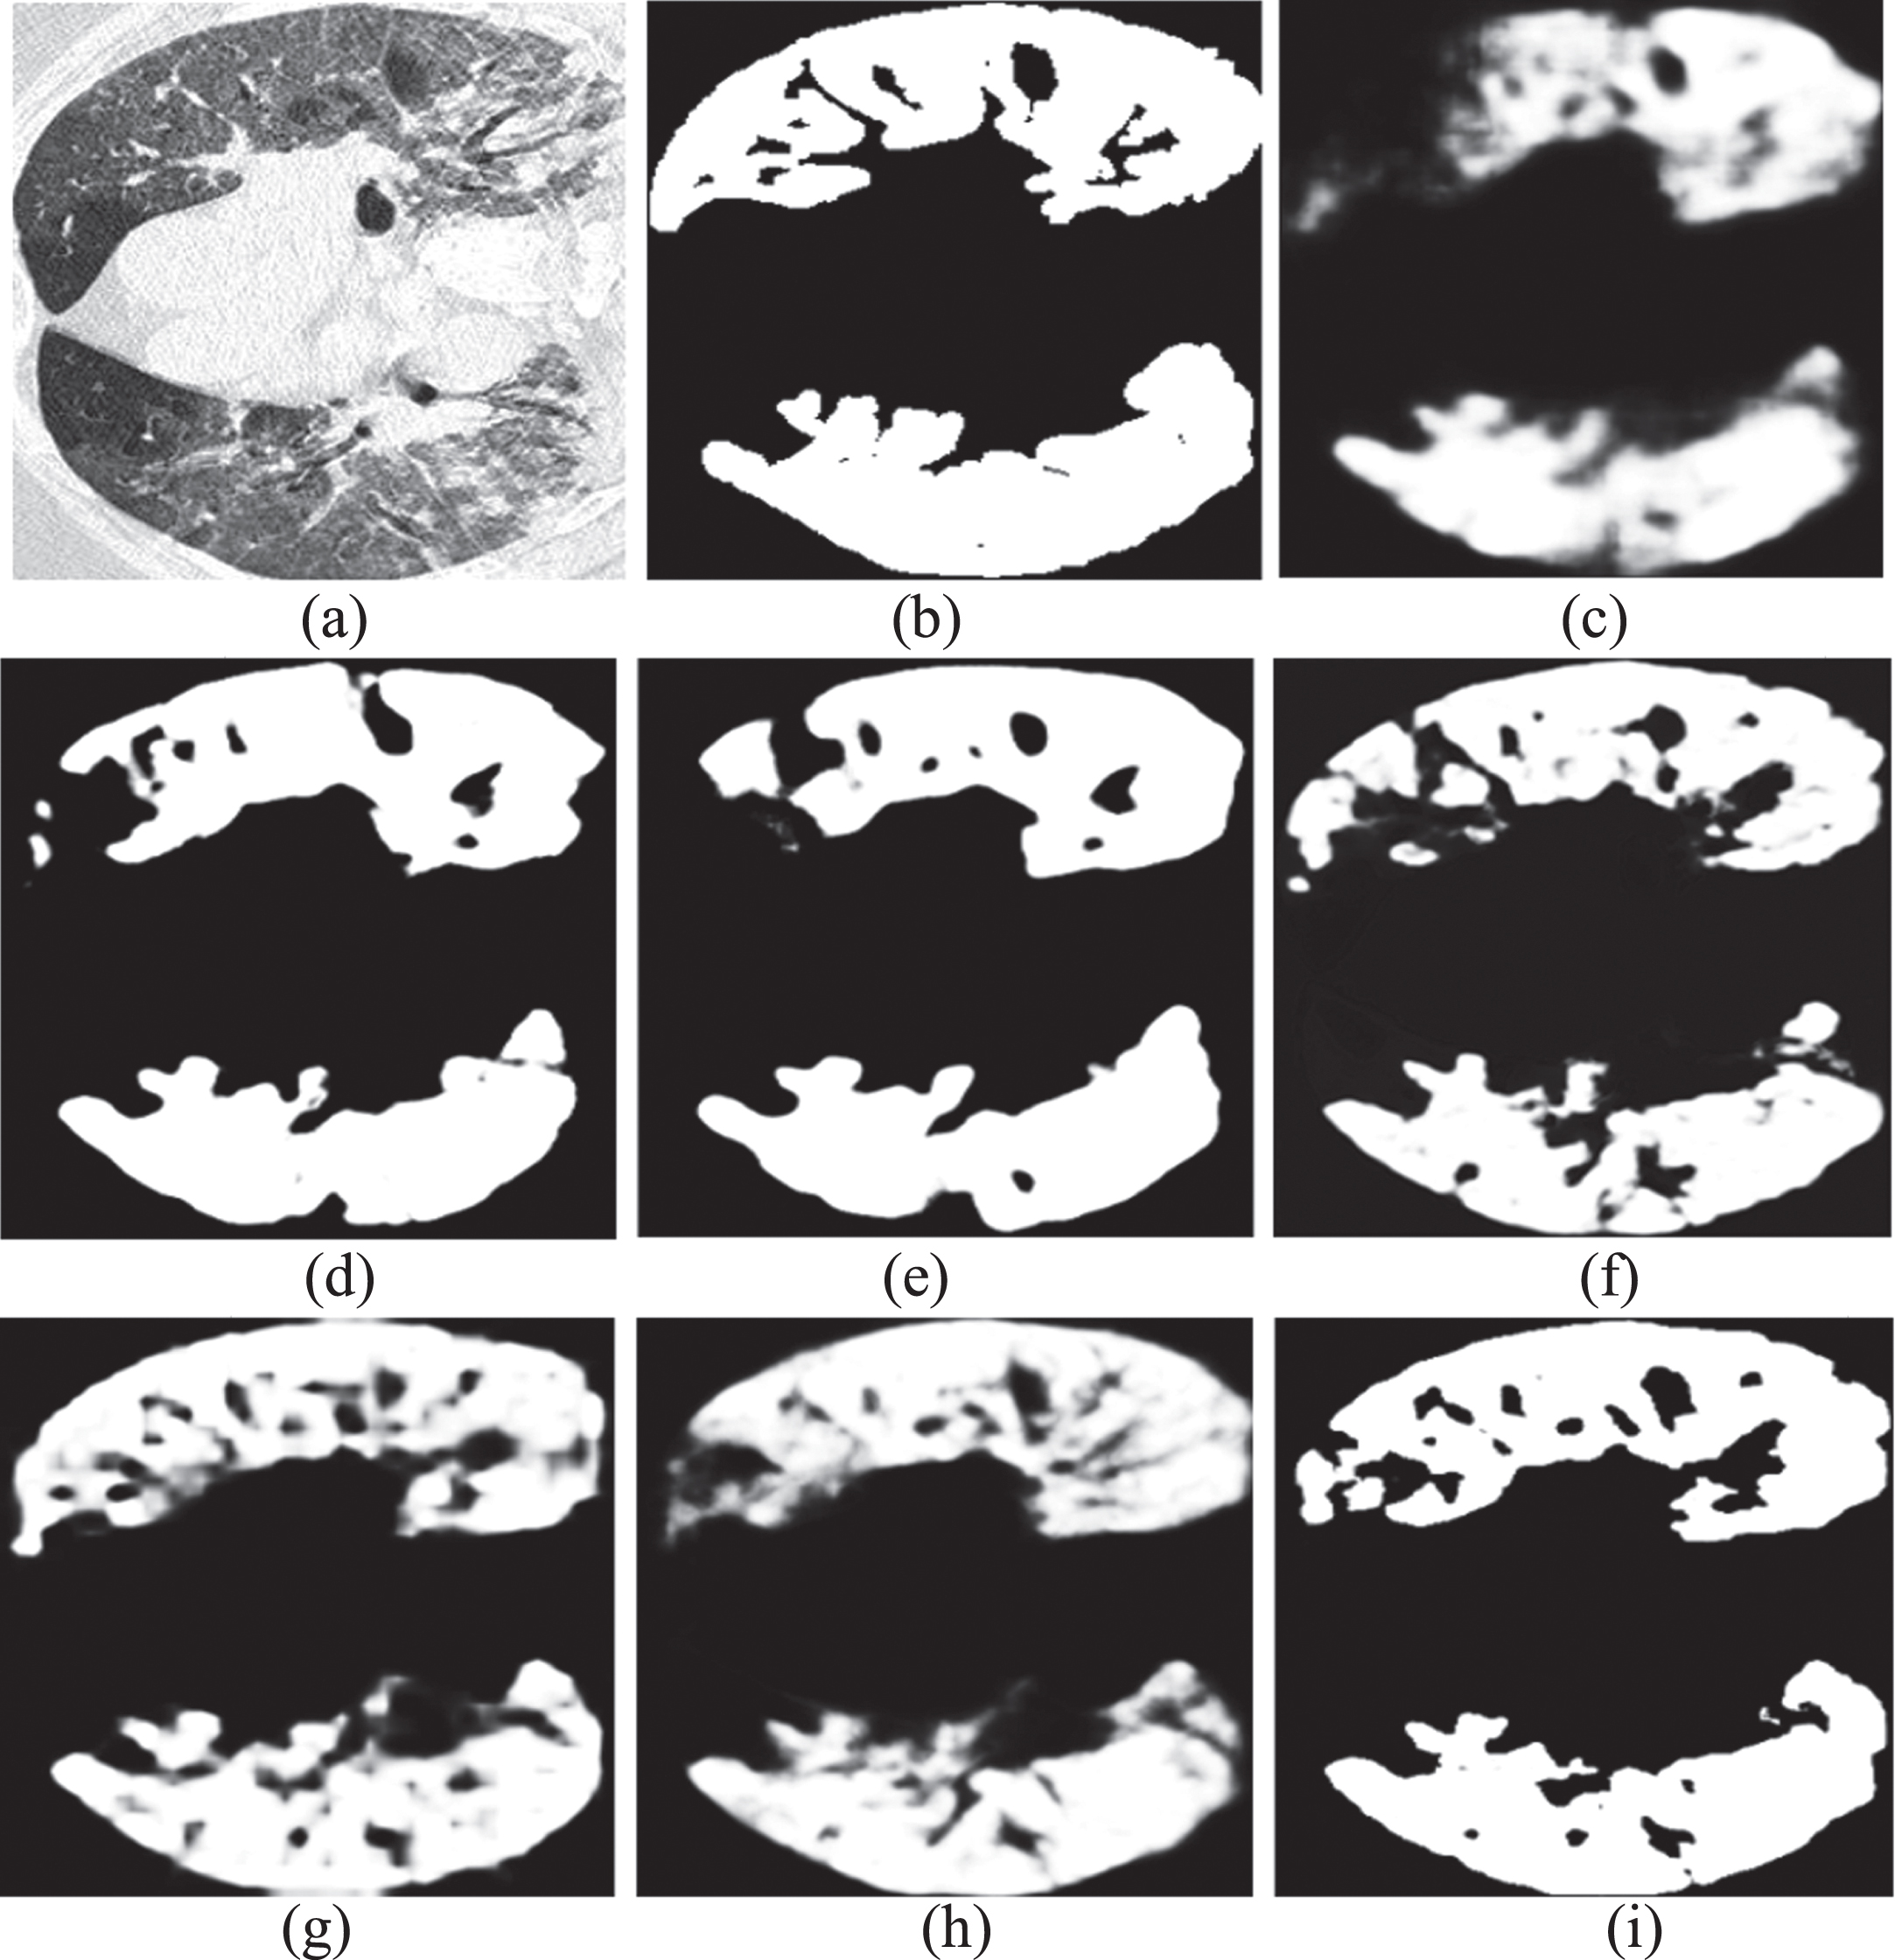 Segmenting results of another COVID-19 CT scan from testing set using different methods. (a) Raw CT scan; (b) Ground truth; (c) UNet, (d) UNet++, (e) Att-UNet, (f) Dense-UNet, (g) Inf-Net, (h) COPLE-Net, and (i) DAF-UNet.